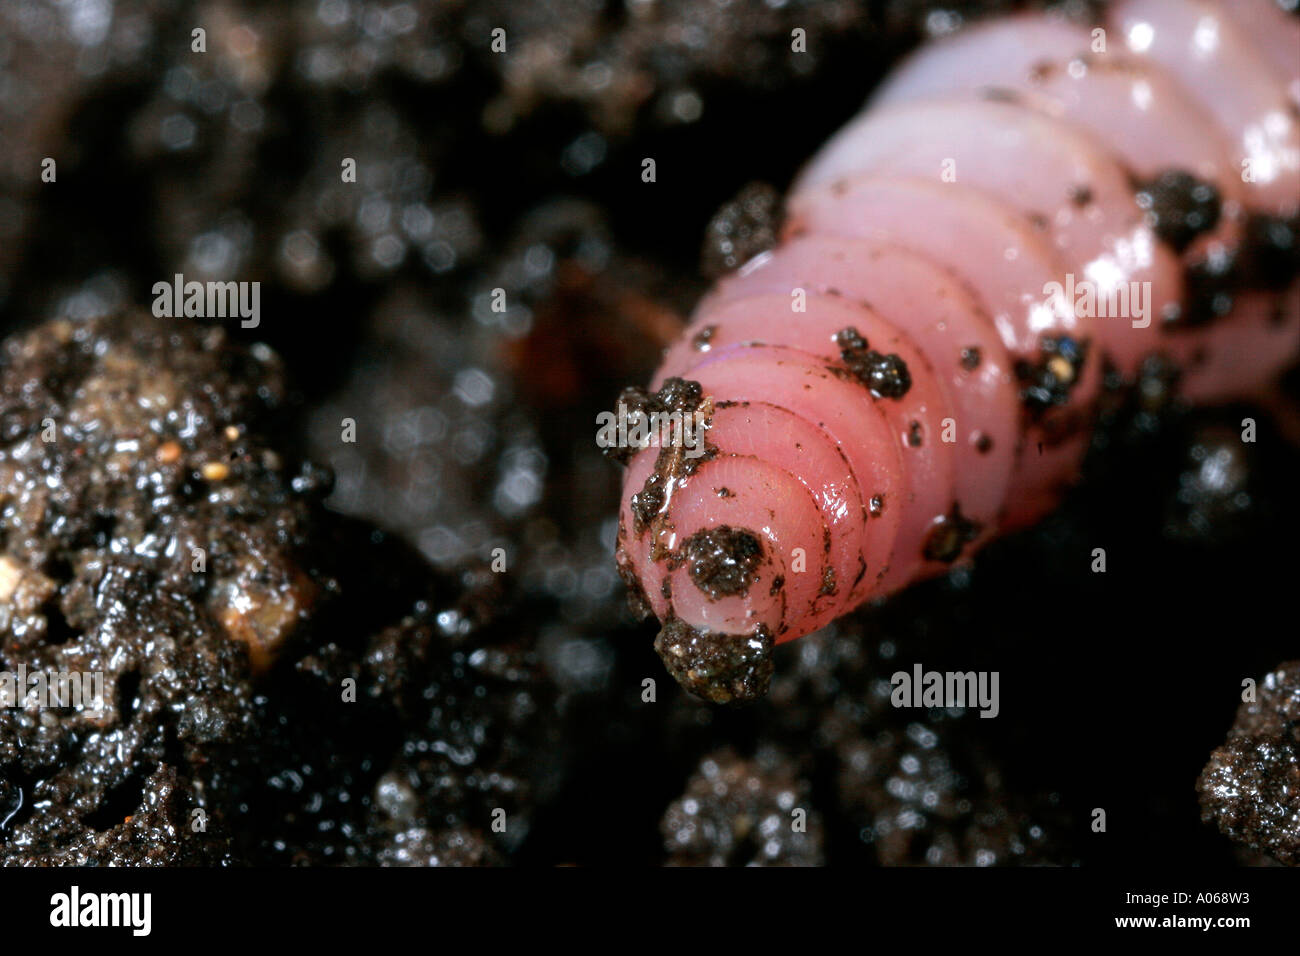 Close up of a slimy worm resting in the mud Stock Photo